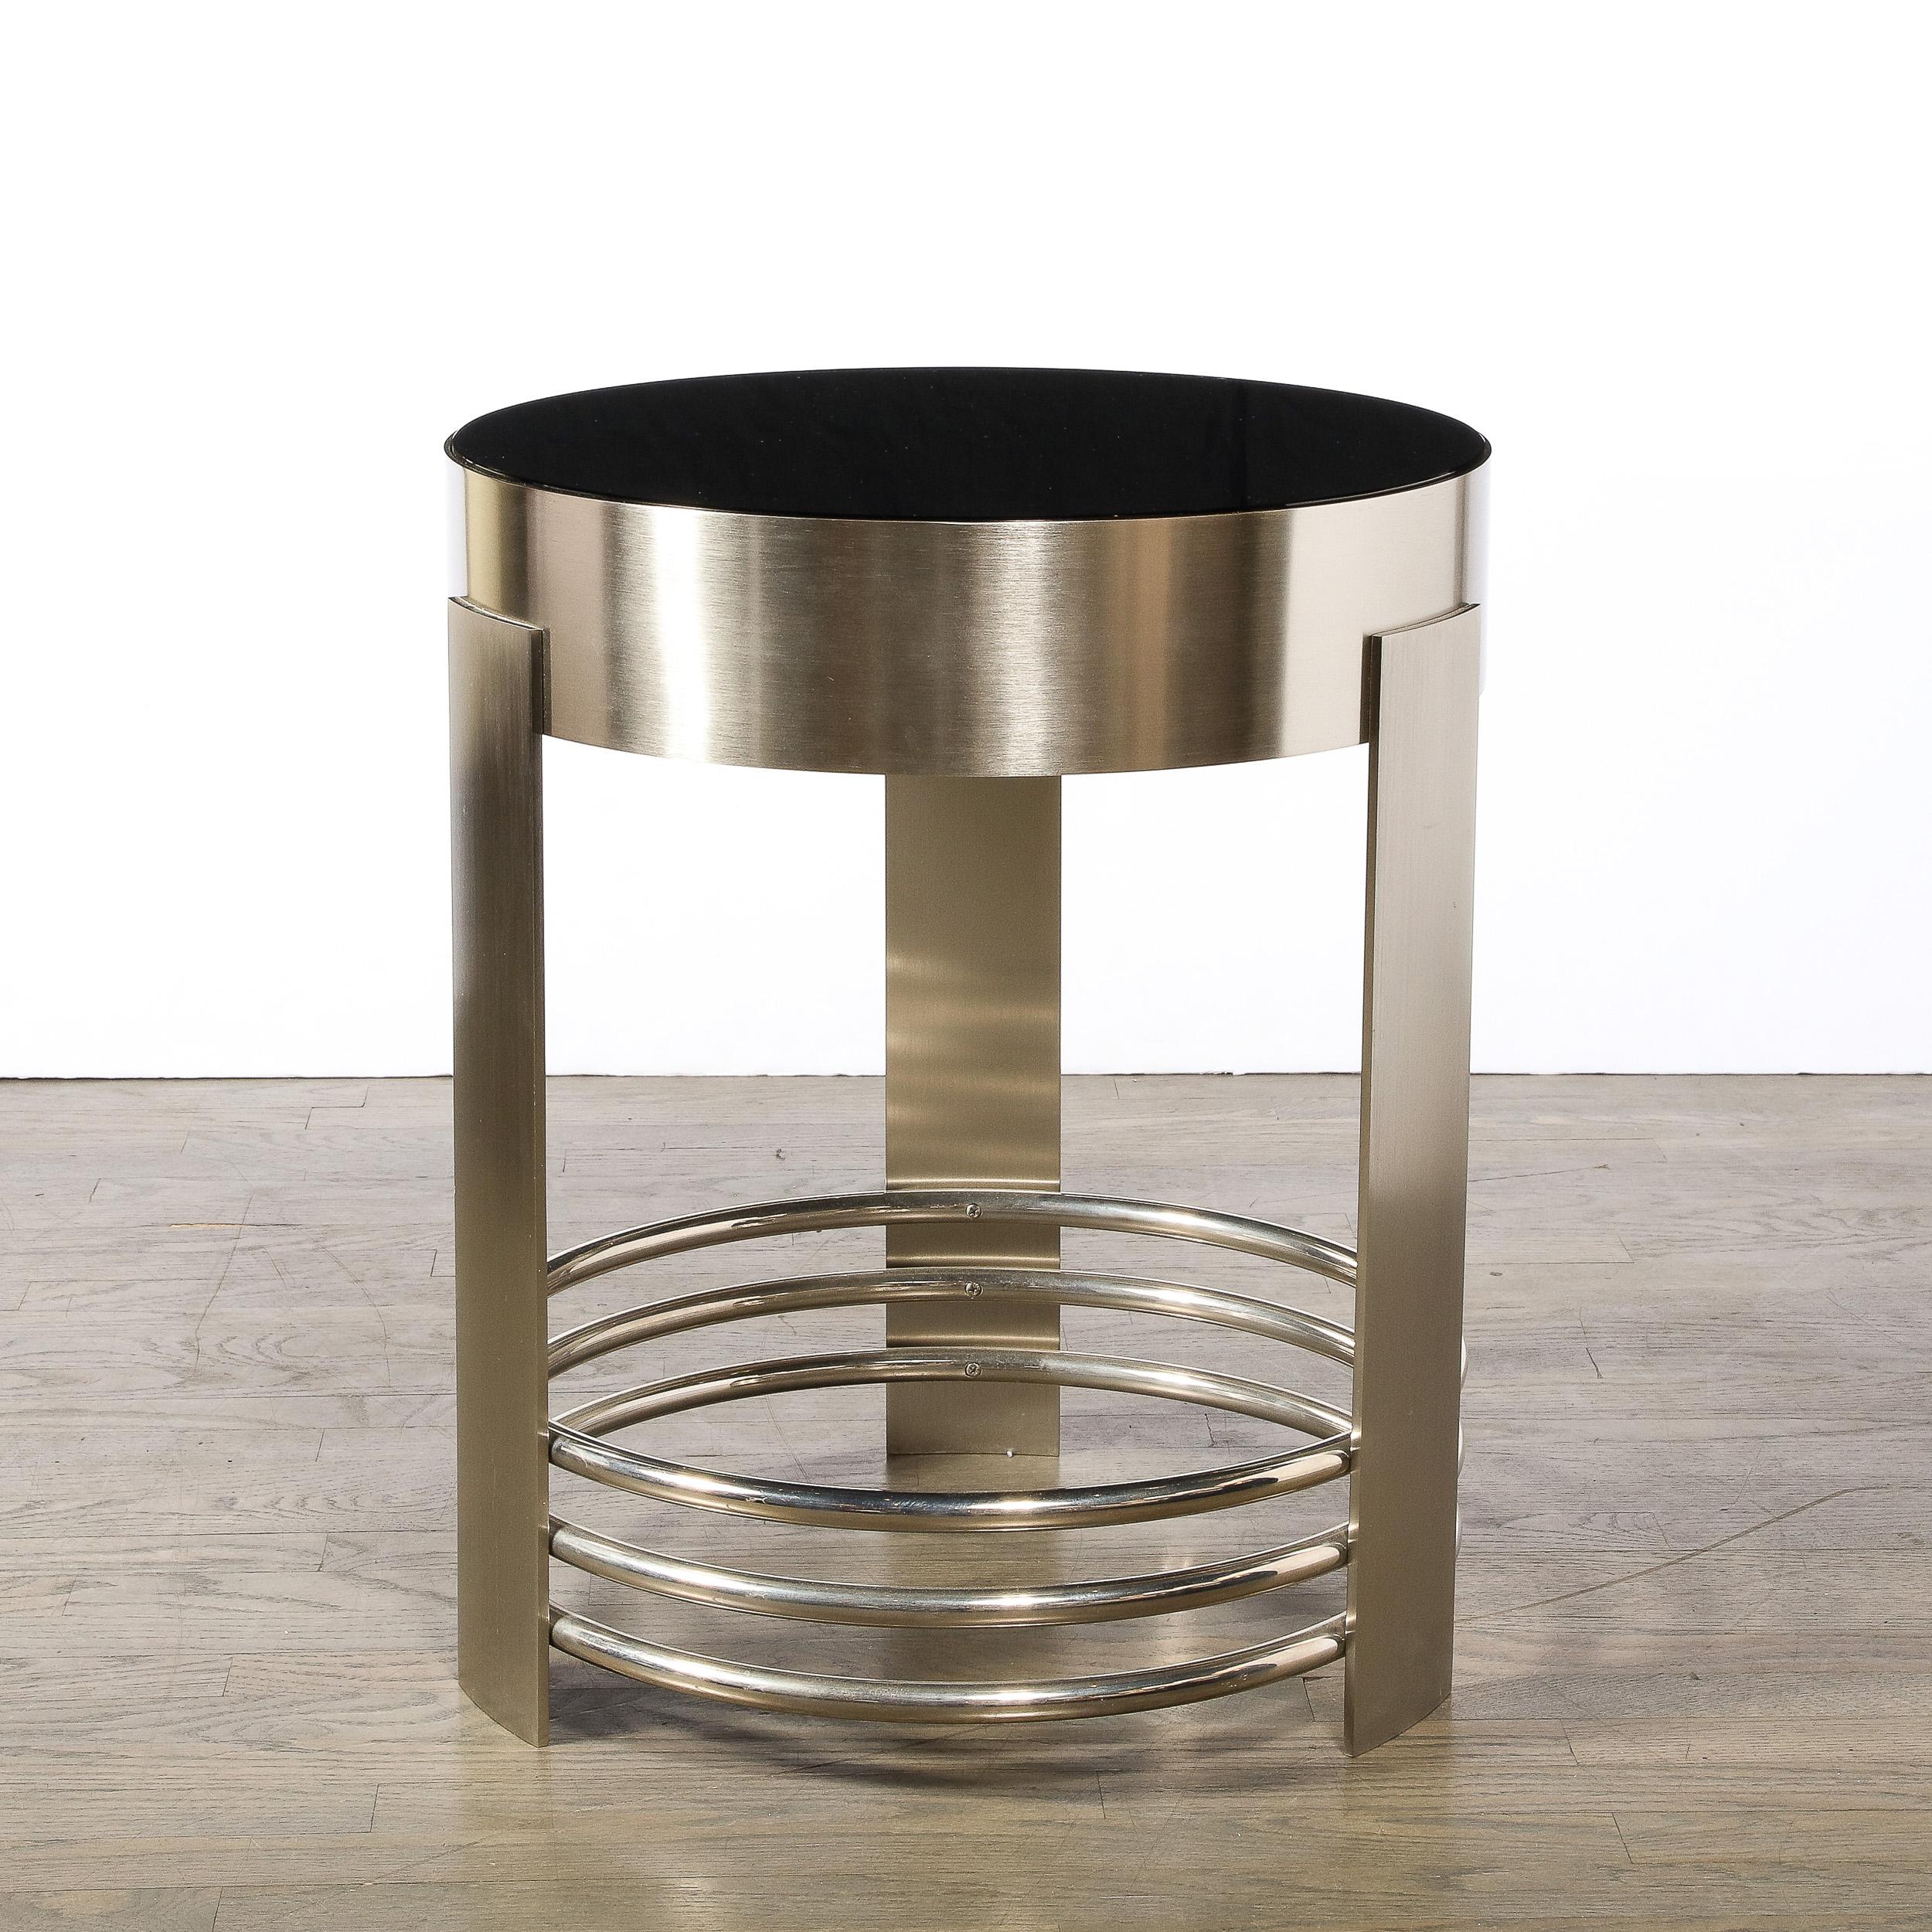 This stunning and impactful Art Deco revival occasional table was realized in the United States during the latter half of the 20th century. It features three rectangular supports in brushed nickel connected on the interior by three stacked